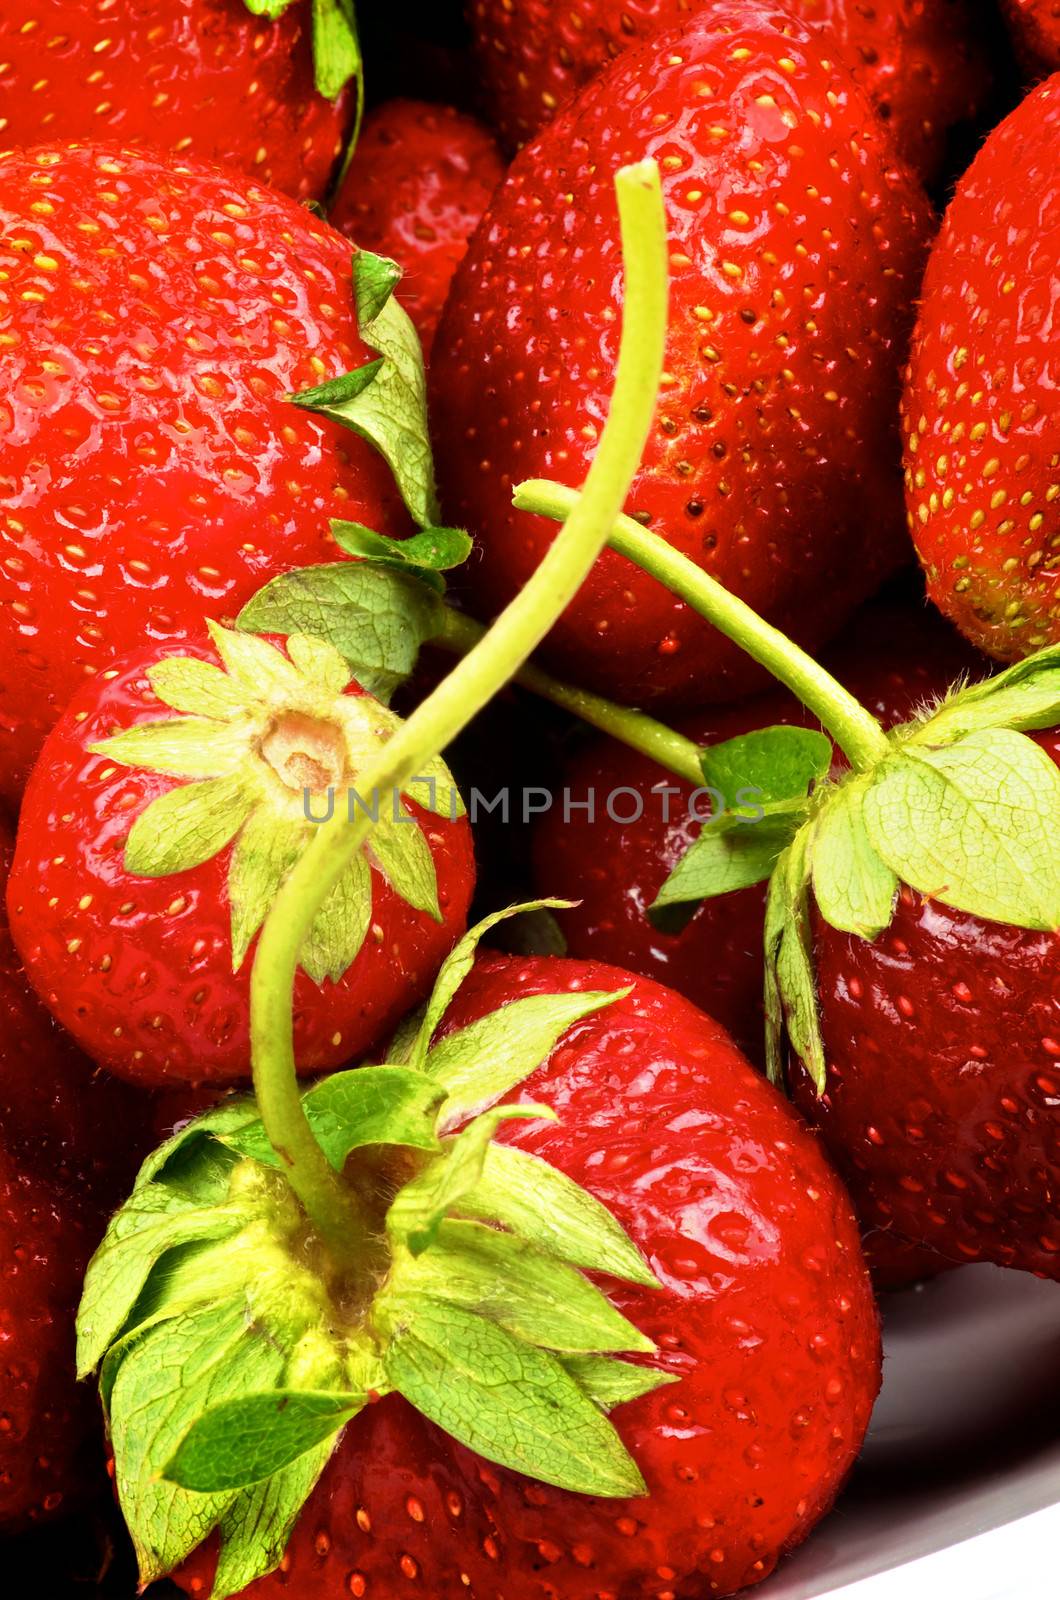 Fresh Sweet Strawberries with Stems closeup as Background